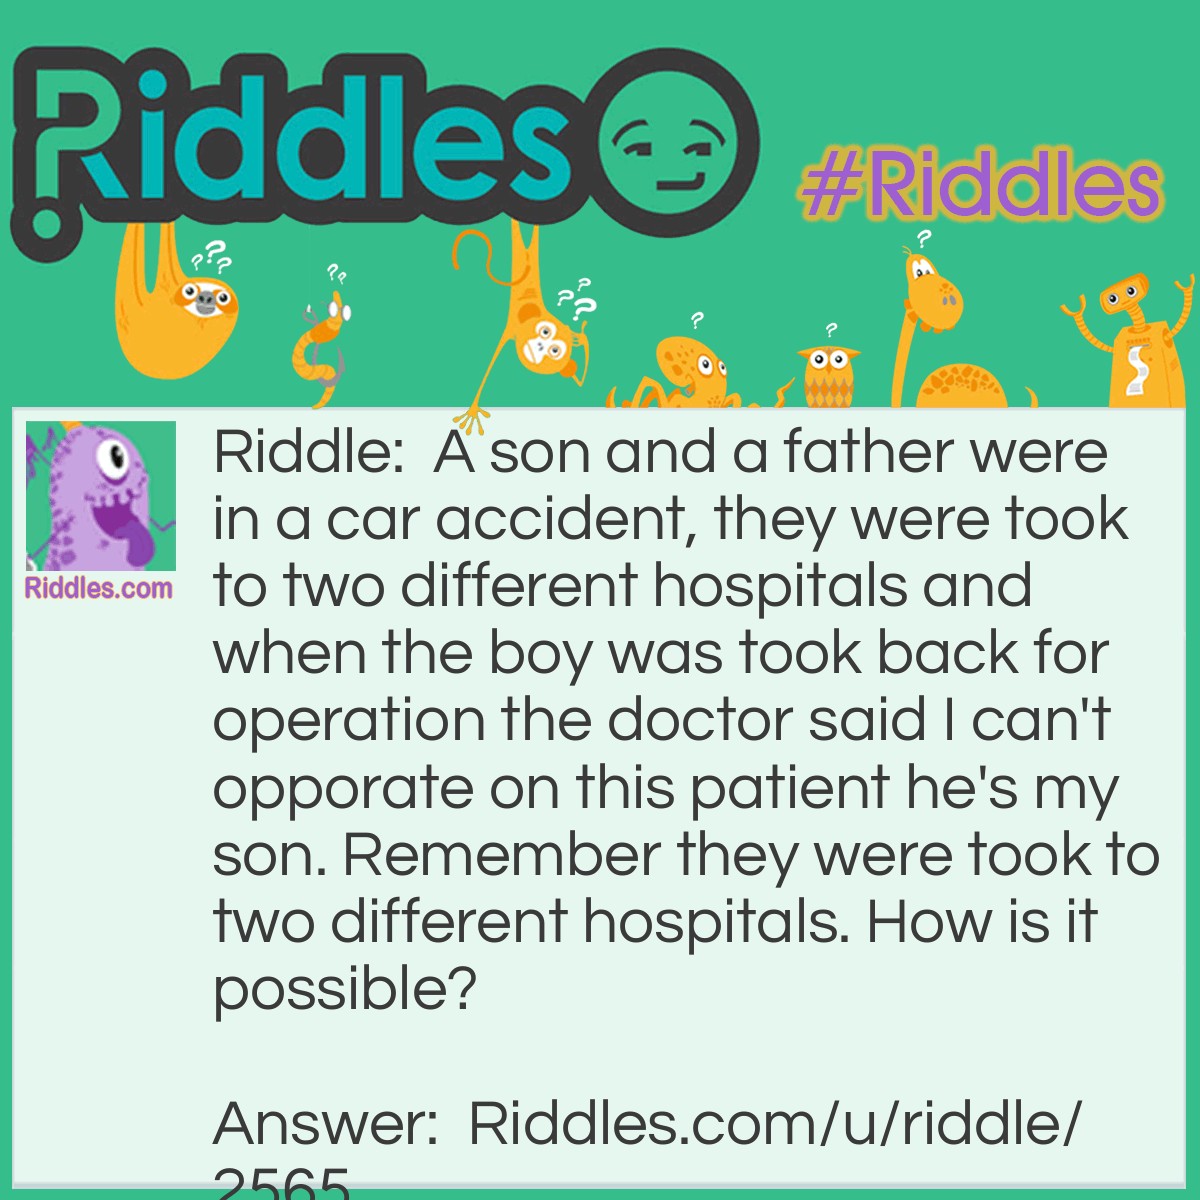 Riddle: A son and a father were in a car accident, they were took to two different hospitals and when the boy was took back for operation the doctor said I can't opporate on this patient he's my son. Remember they were took to two different hospitals. How is it possible? Answer: The doctor was his mother.